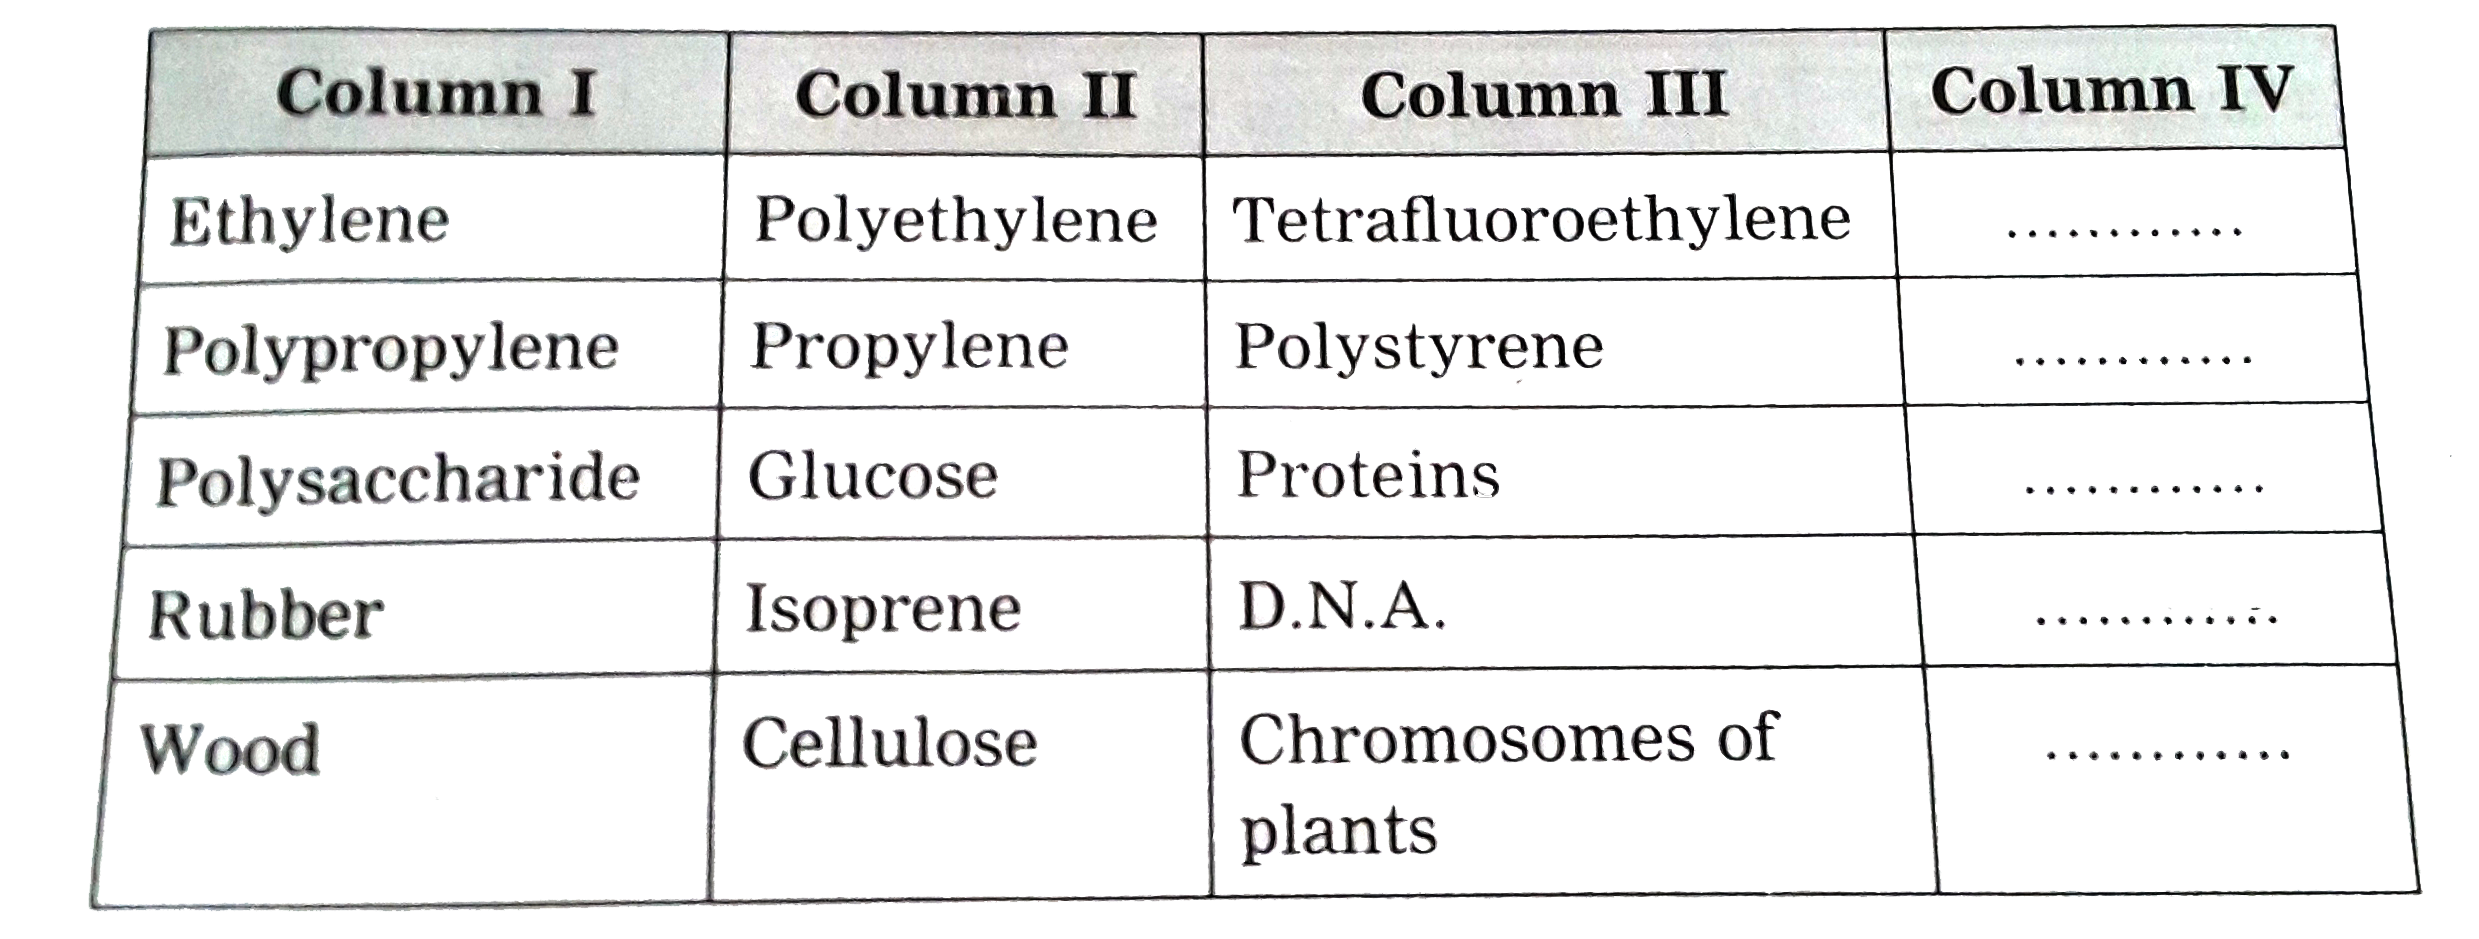 Consider the relation between column I and II . Fill in Column IV to match Column III .